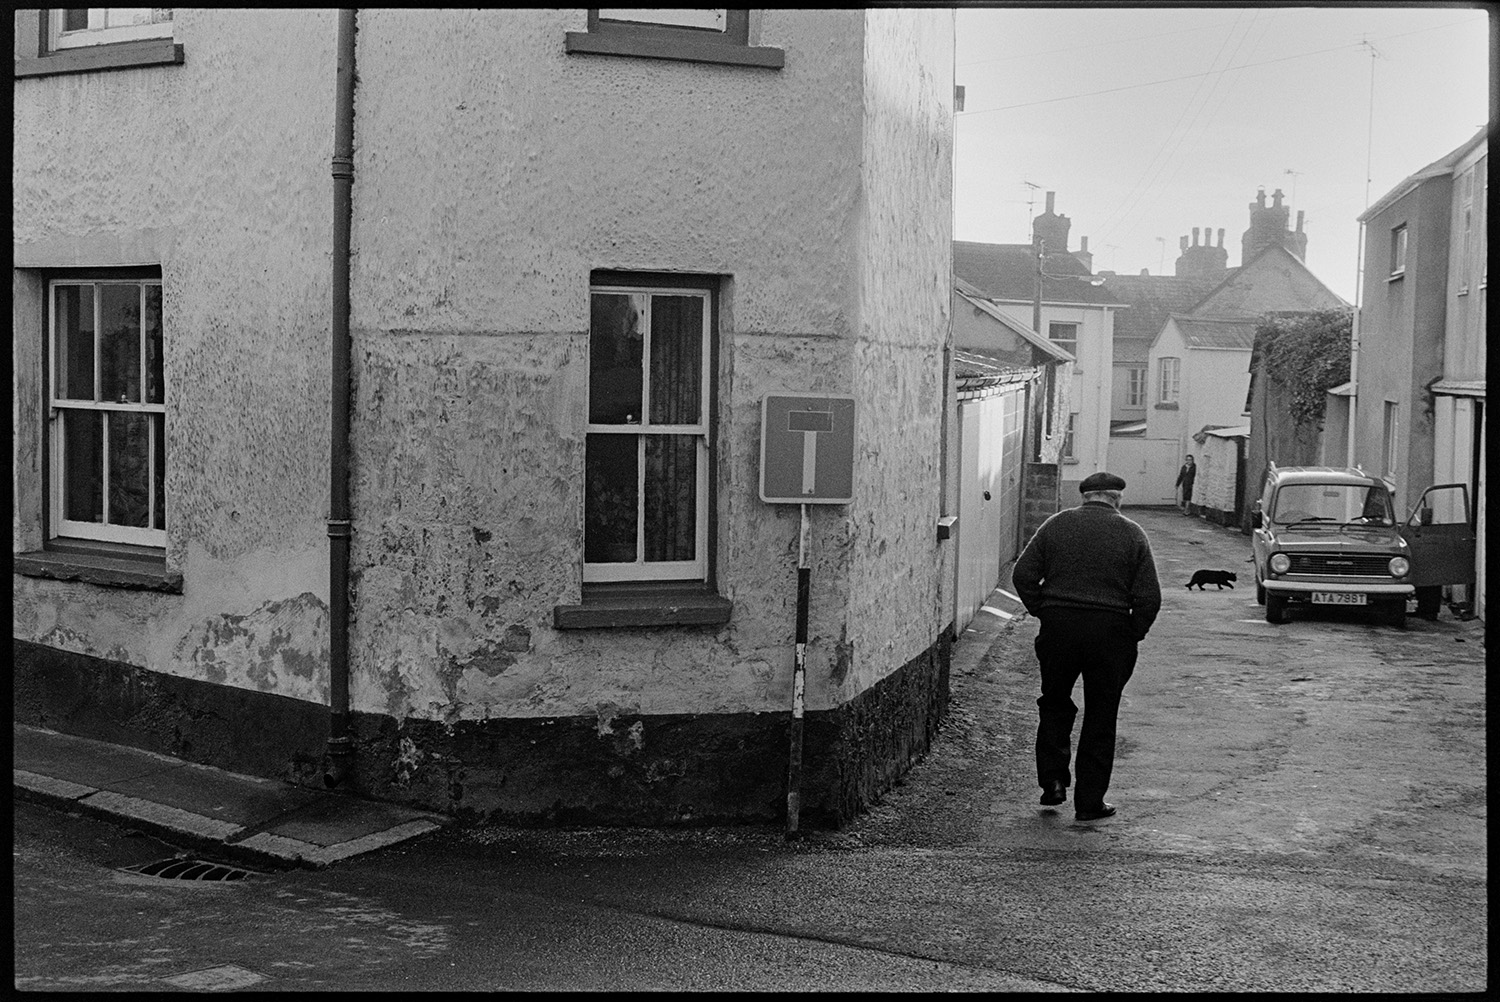 Back lane with cob walls and passers by. 
[A man walking down Buddle Lane, Hatherleigh. A parked car and a cat can be seen further down the street.]